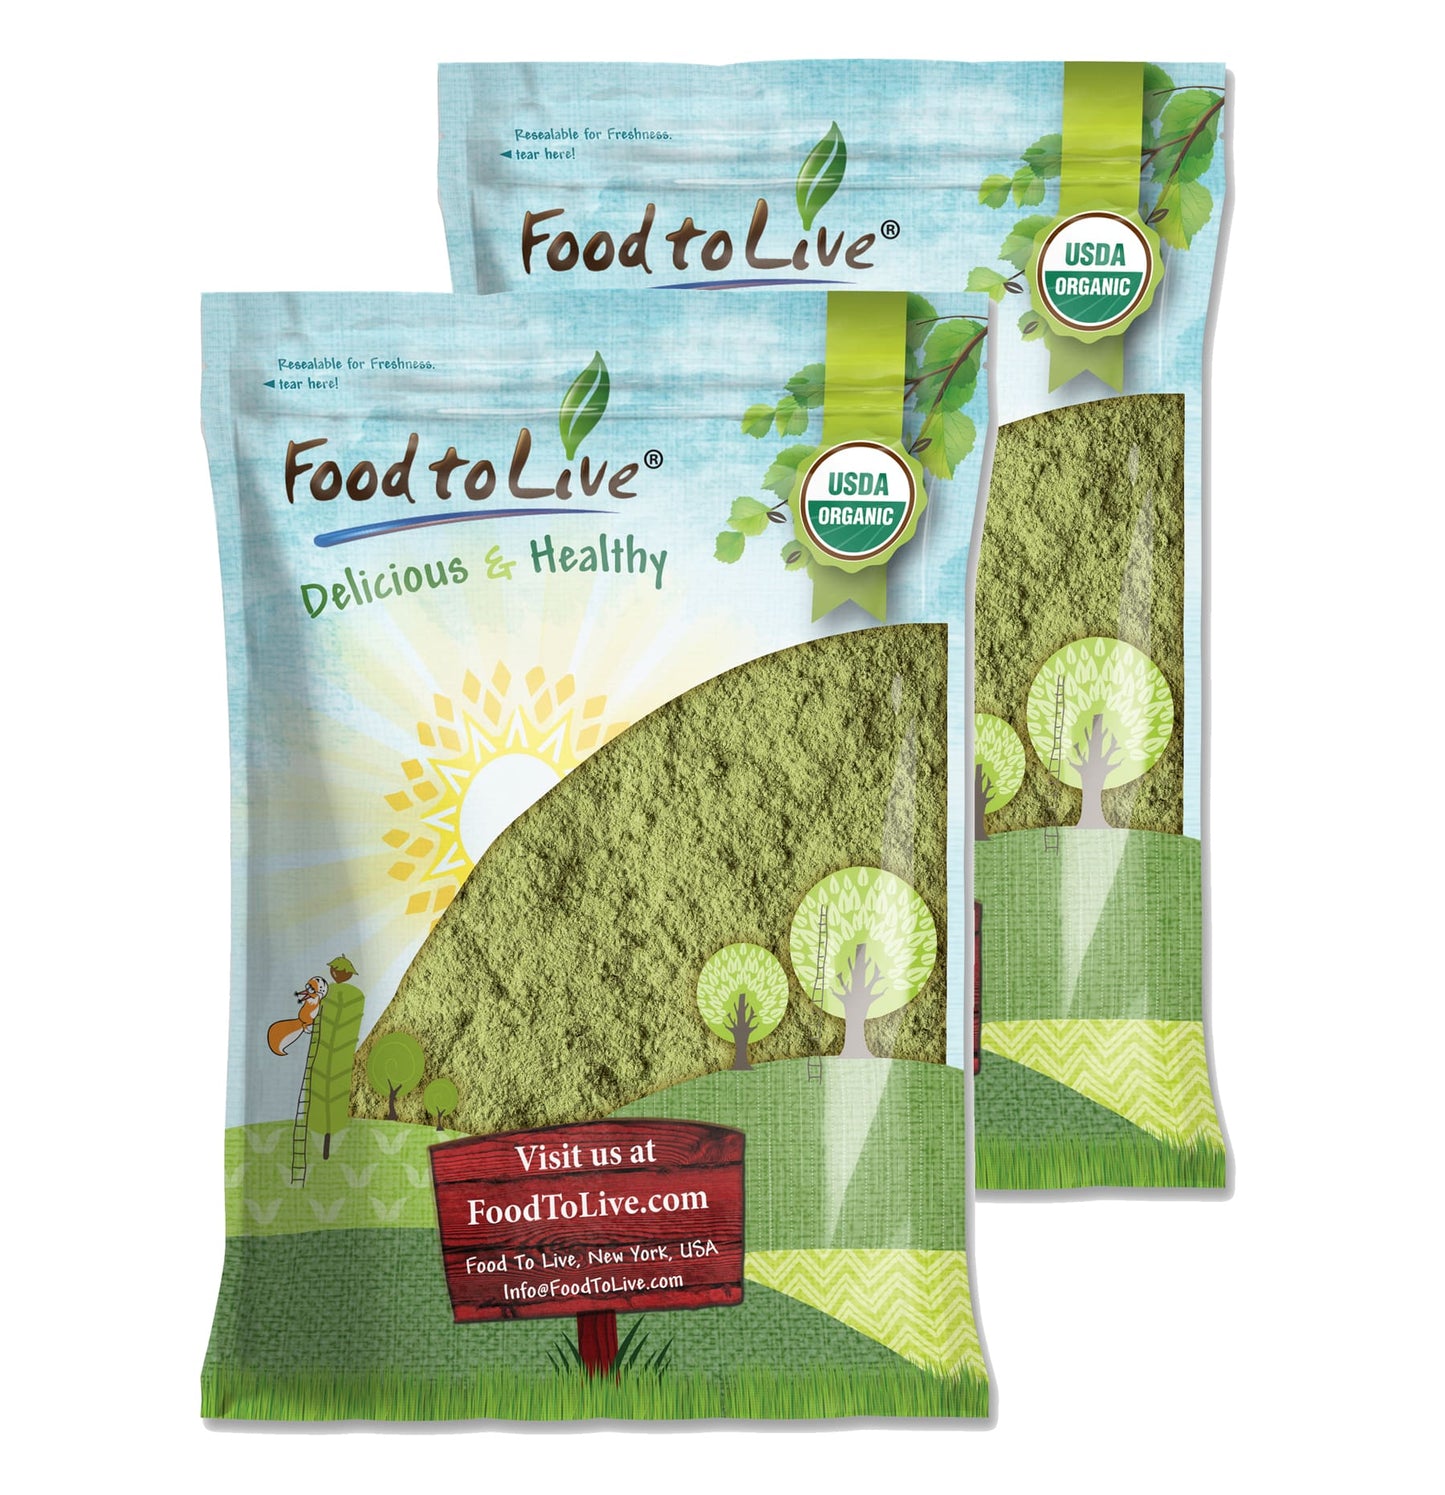 Organic Broccoli Powder - Non-GMO, Raw, Kosher, 100% Pure, Ground from Whole Vegetables, Vegan, Bulk, Sirtfood - by Food to Live